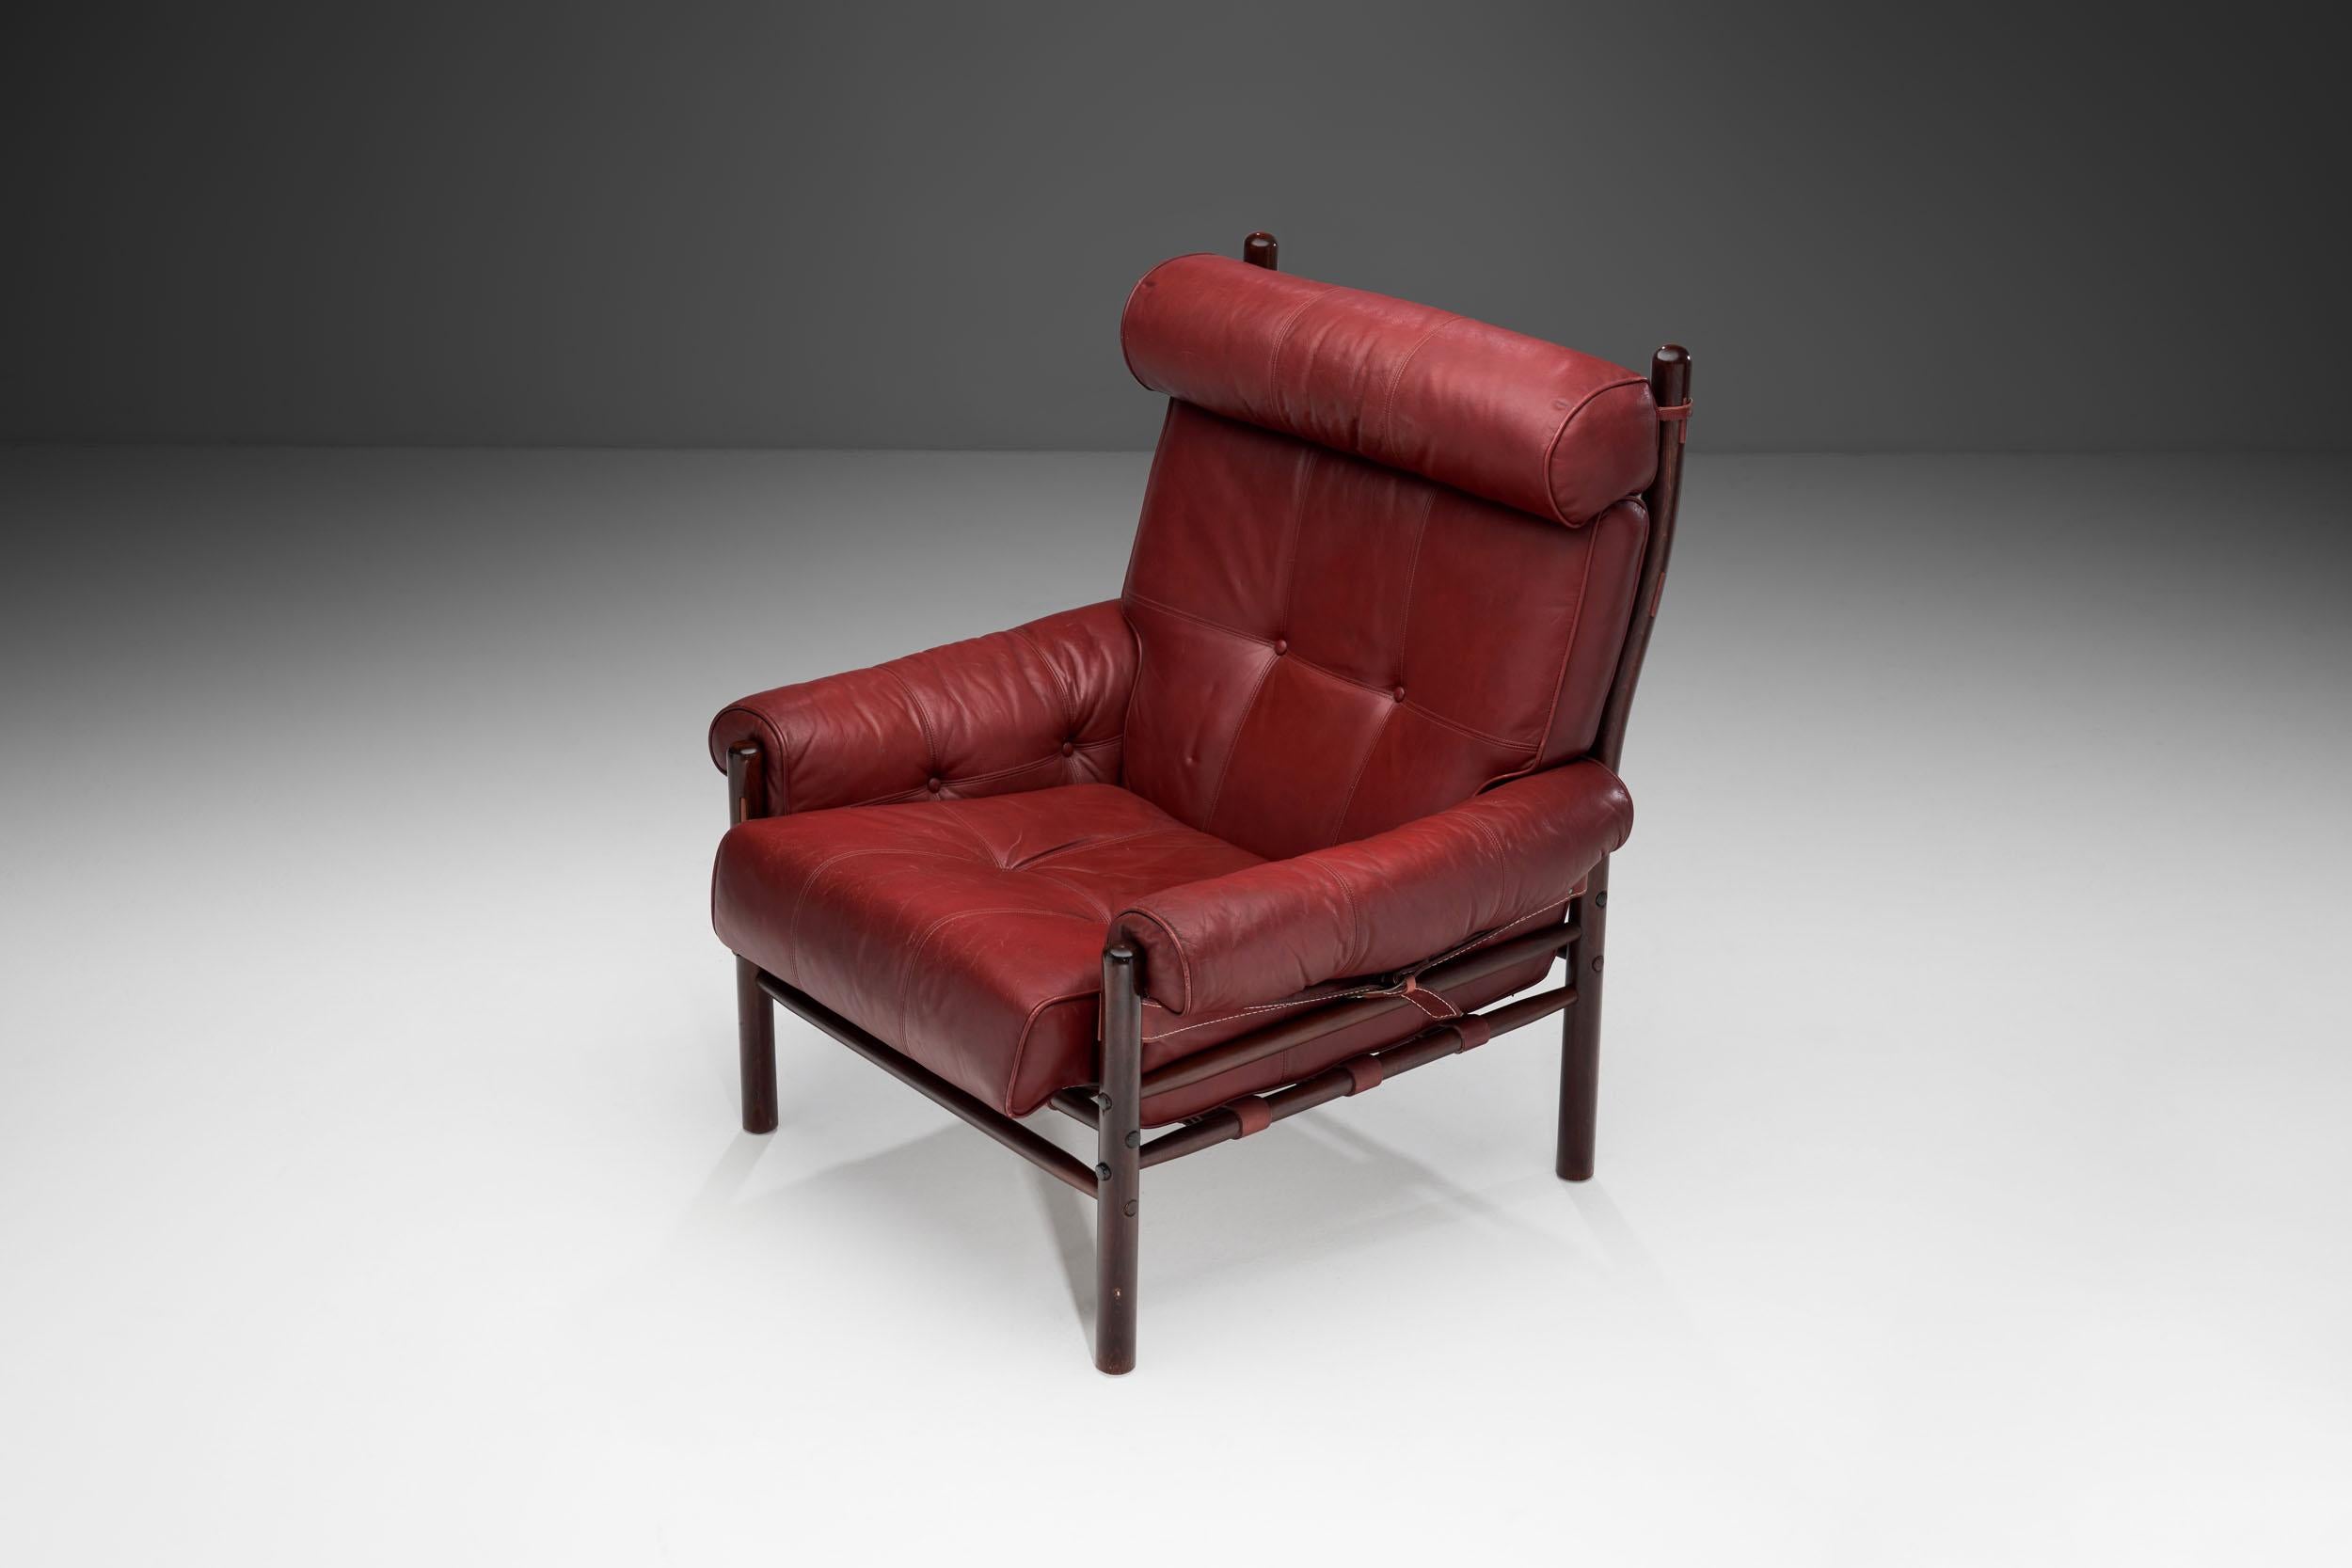 Mid-20th Century “Inca” Lounge Chair by Arne Norell for Arne Norell Möbel AB Aneby, Sweden, 1960s